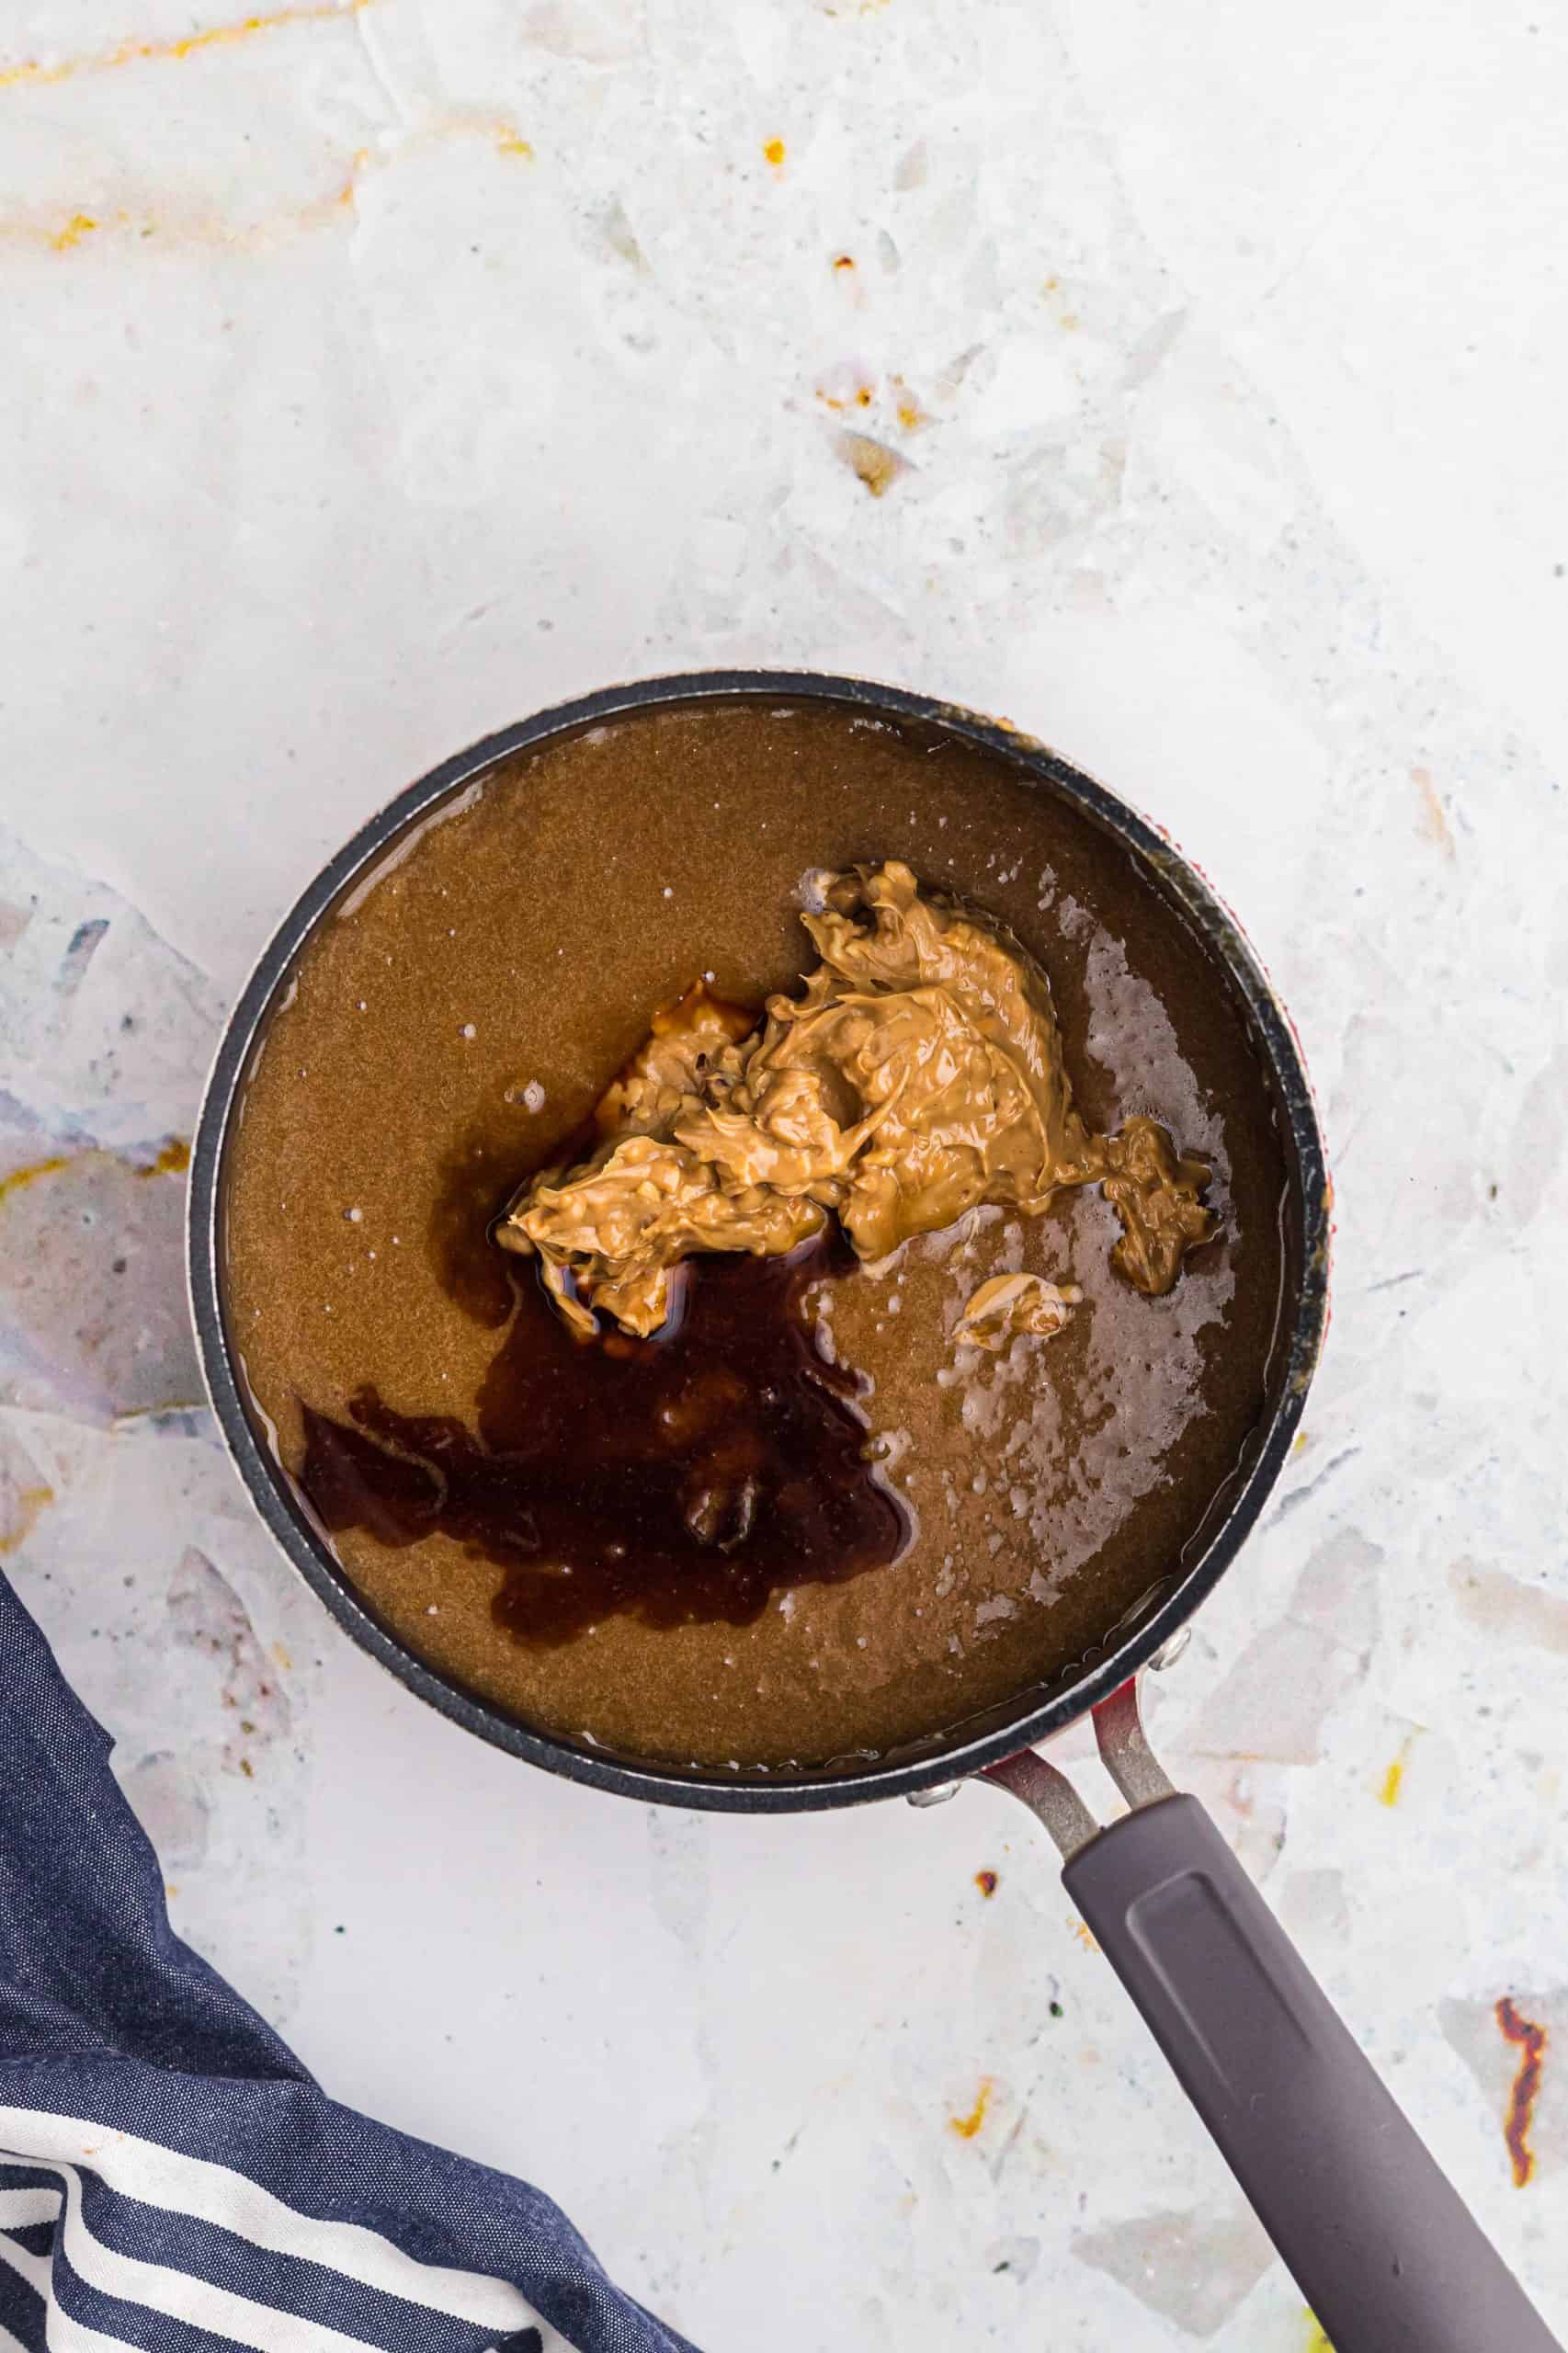 crunchy peanut butter and vanilla extract added to brown sugar mixture in a sauce pan.